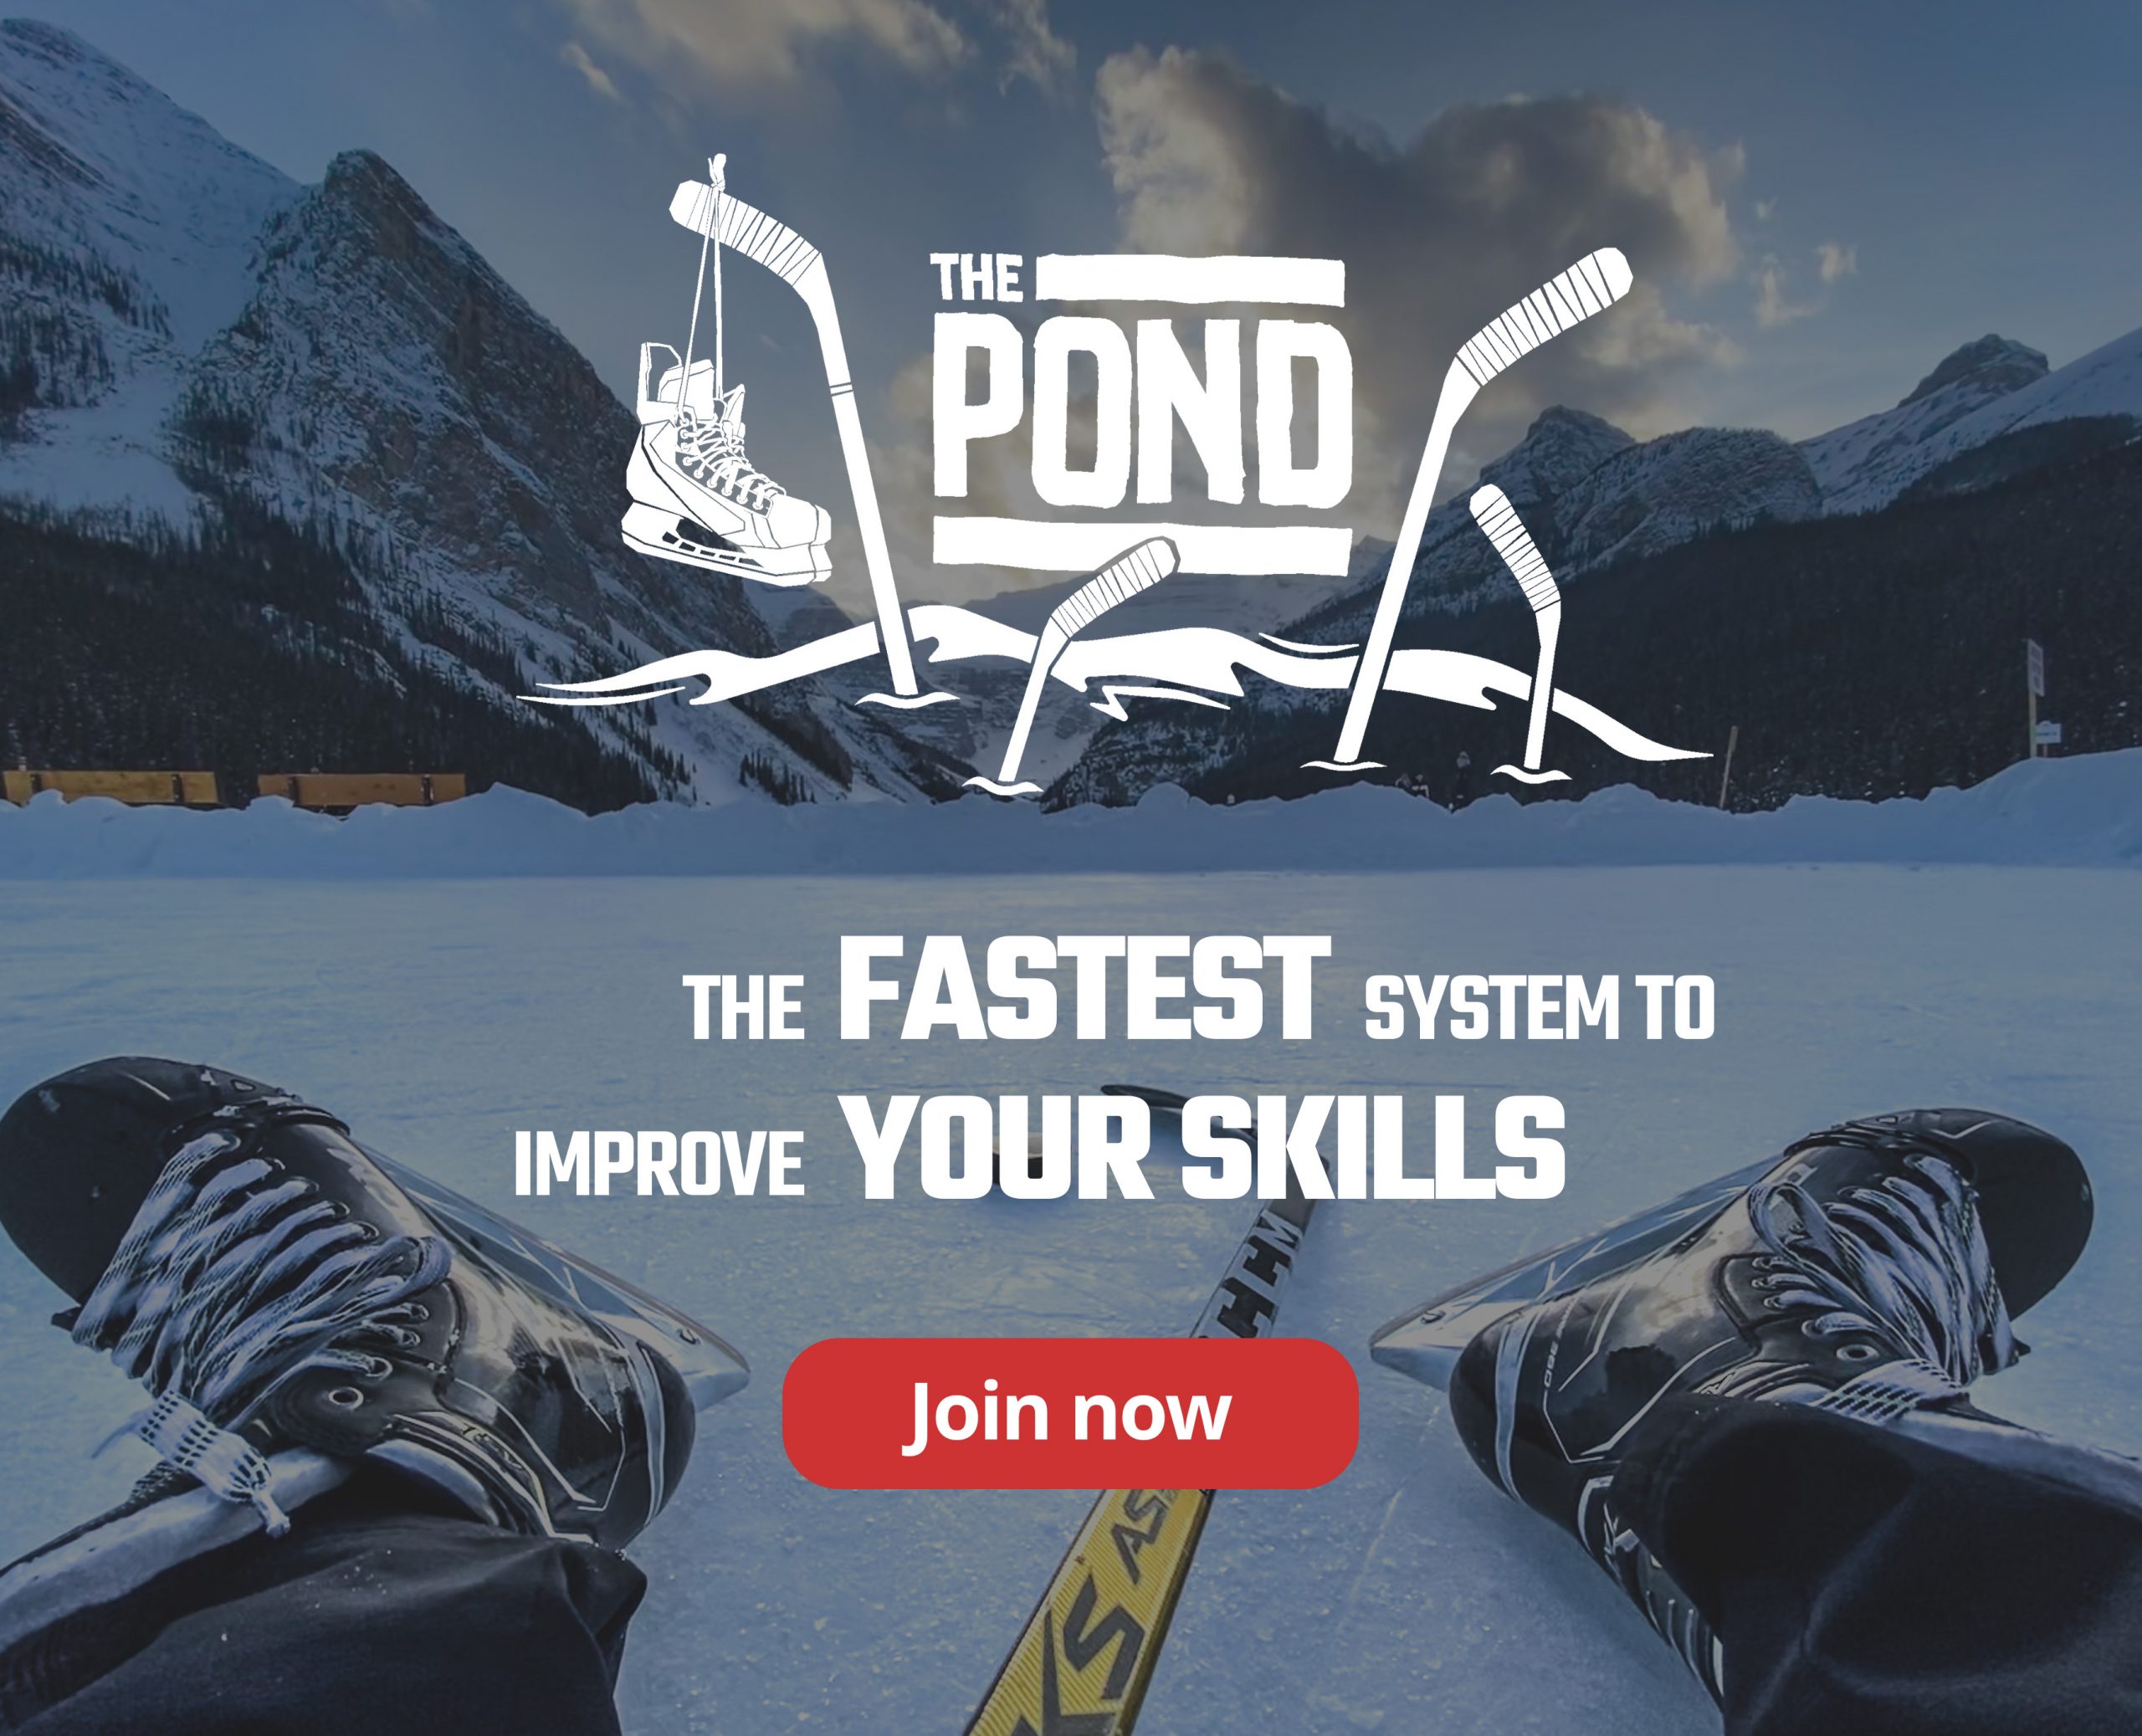 The Pond - Join now!